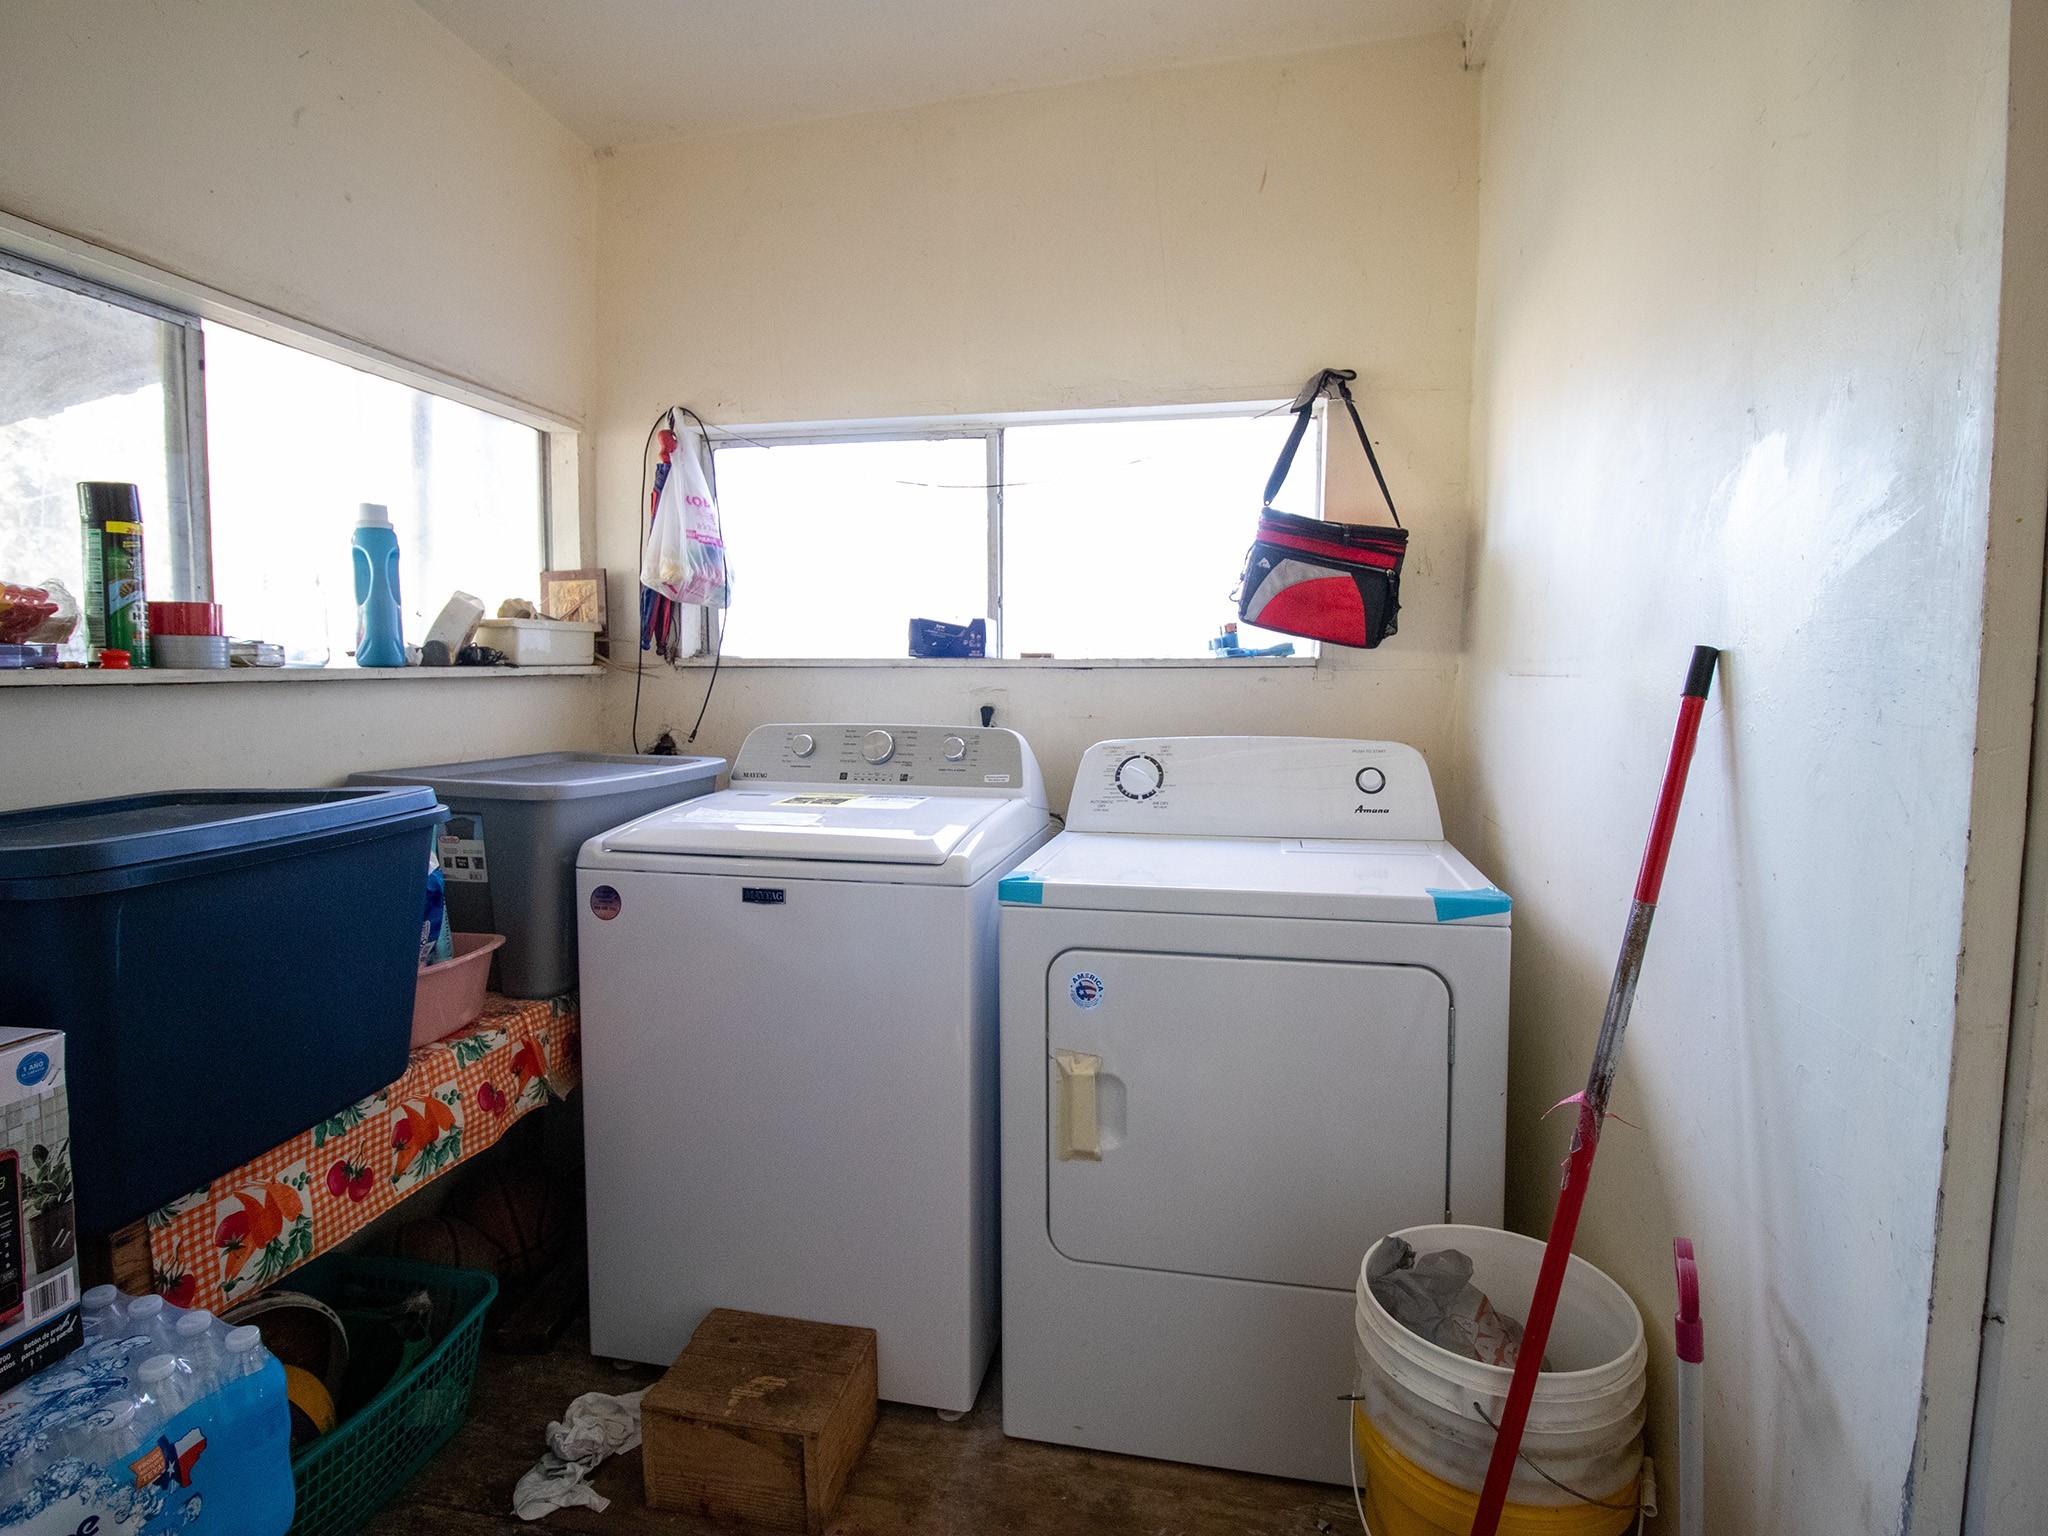 Laundry room located towards the back of the house.